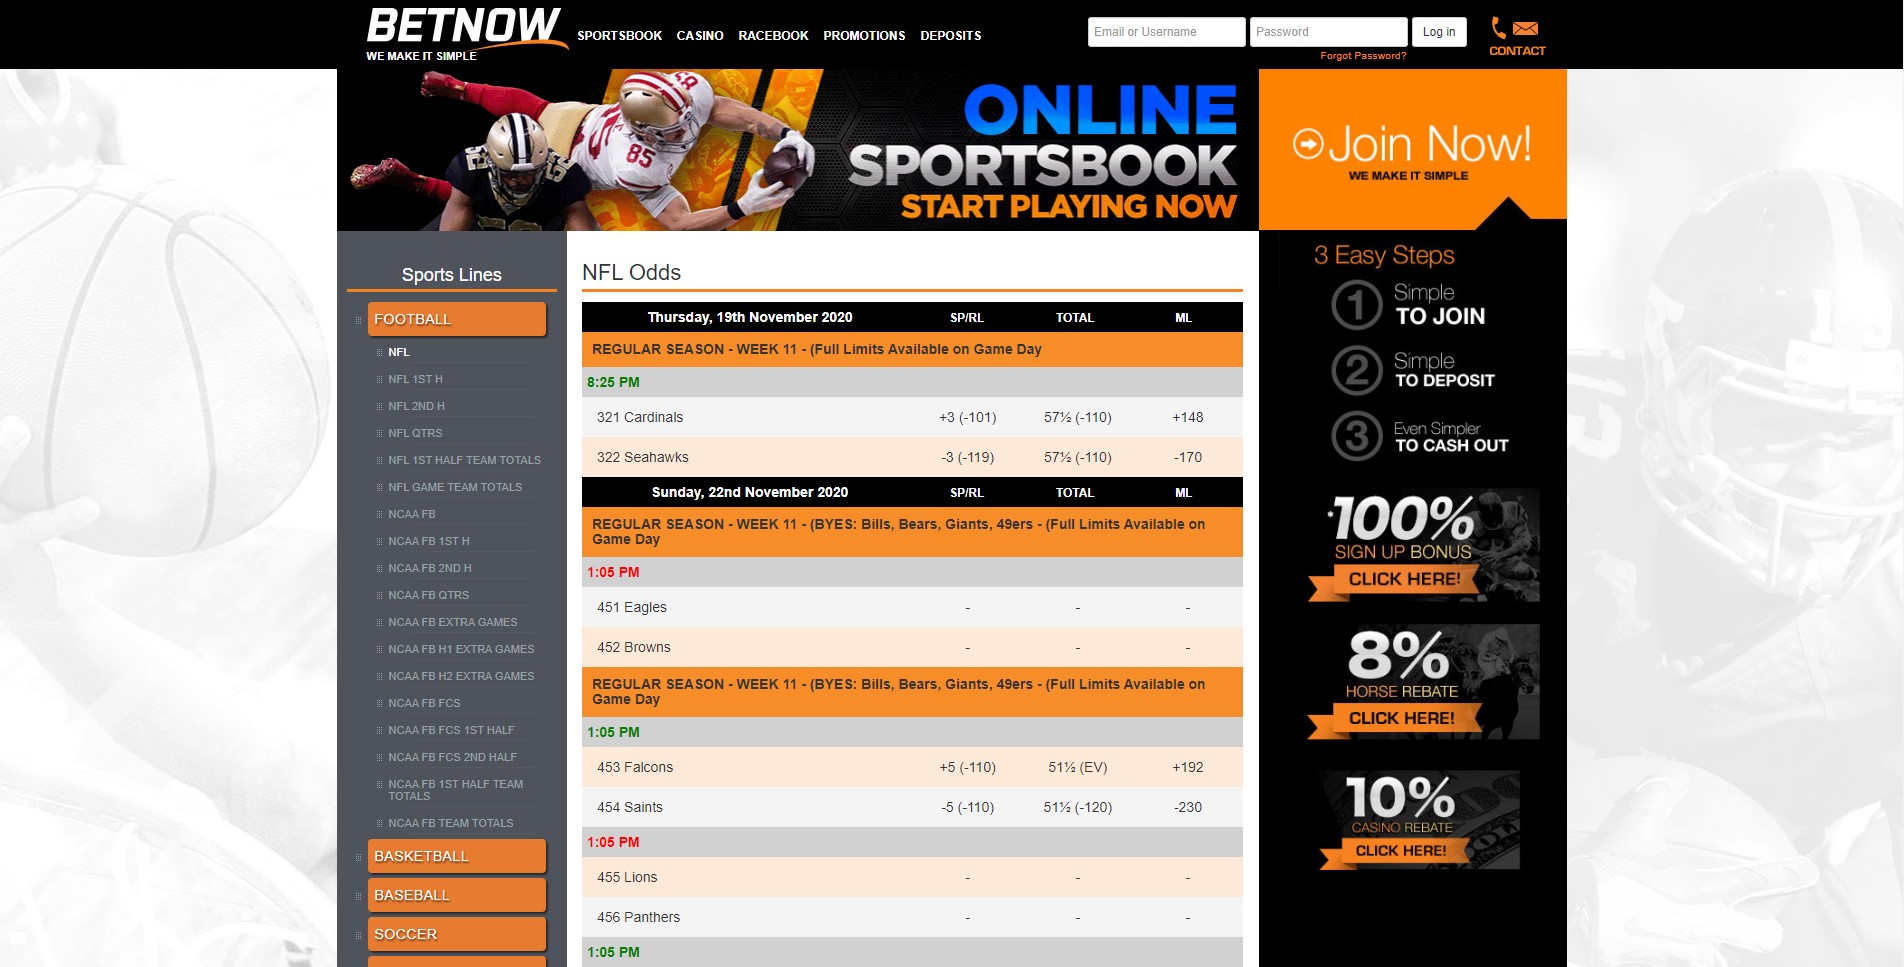 NFL betting options at the BetNow site